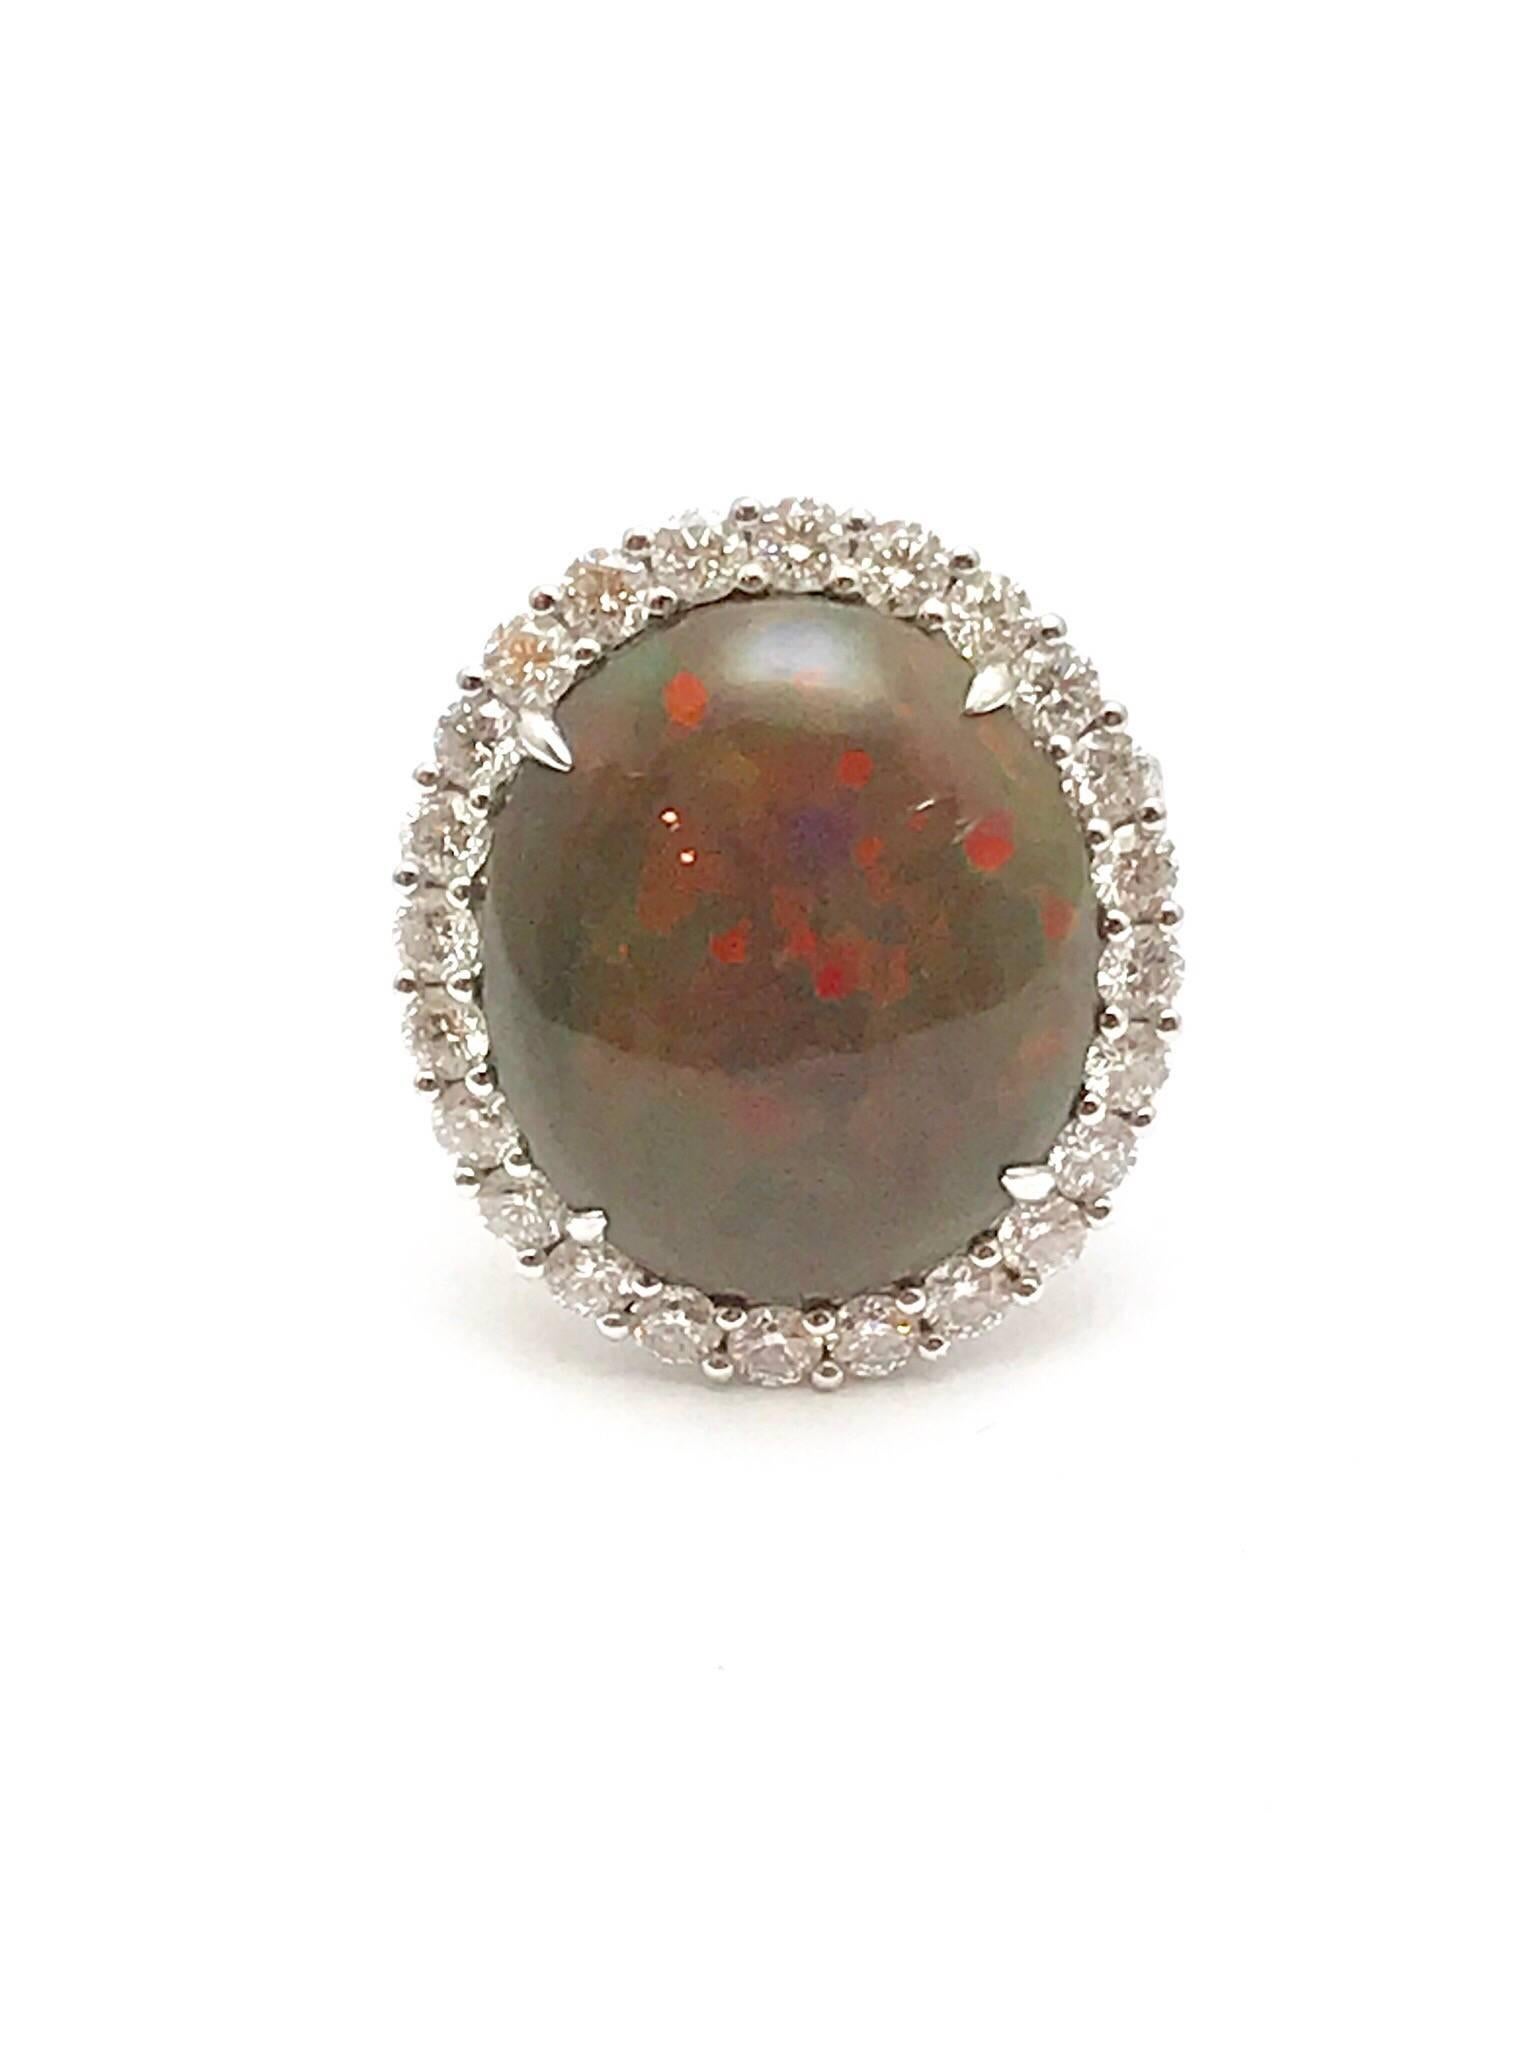 An oval cabochon boulder opal and round brilliant diamond 18 karat white gold ring.  The opal is set with four prongs, framed by a single row of round brilliant diamonds.  The opal measures 17.00 x 15.00mm, and displays a beautiful array of colors. 